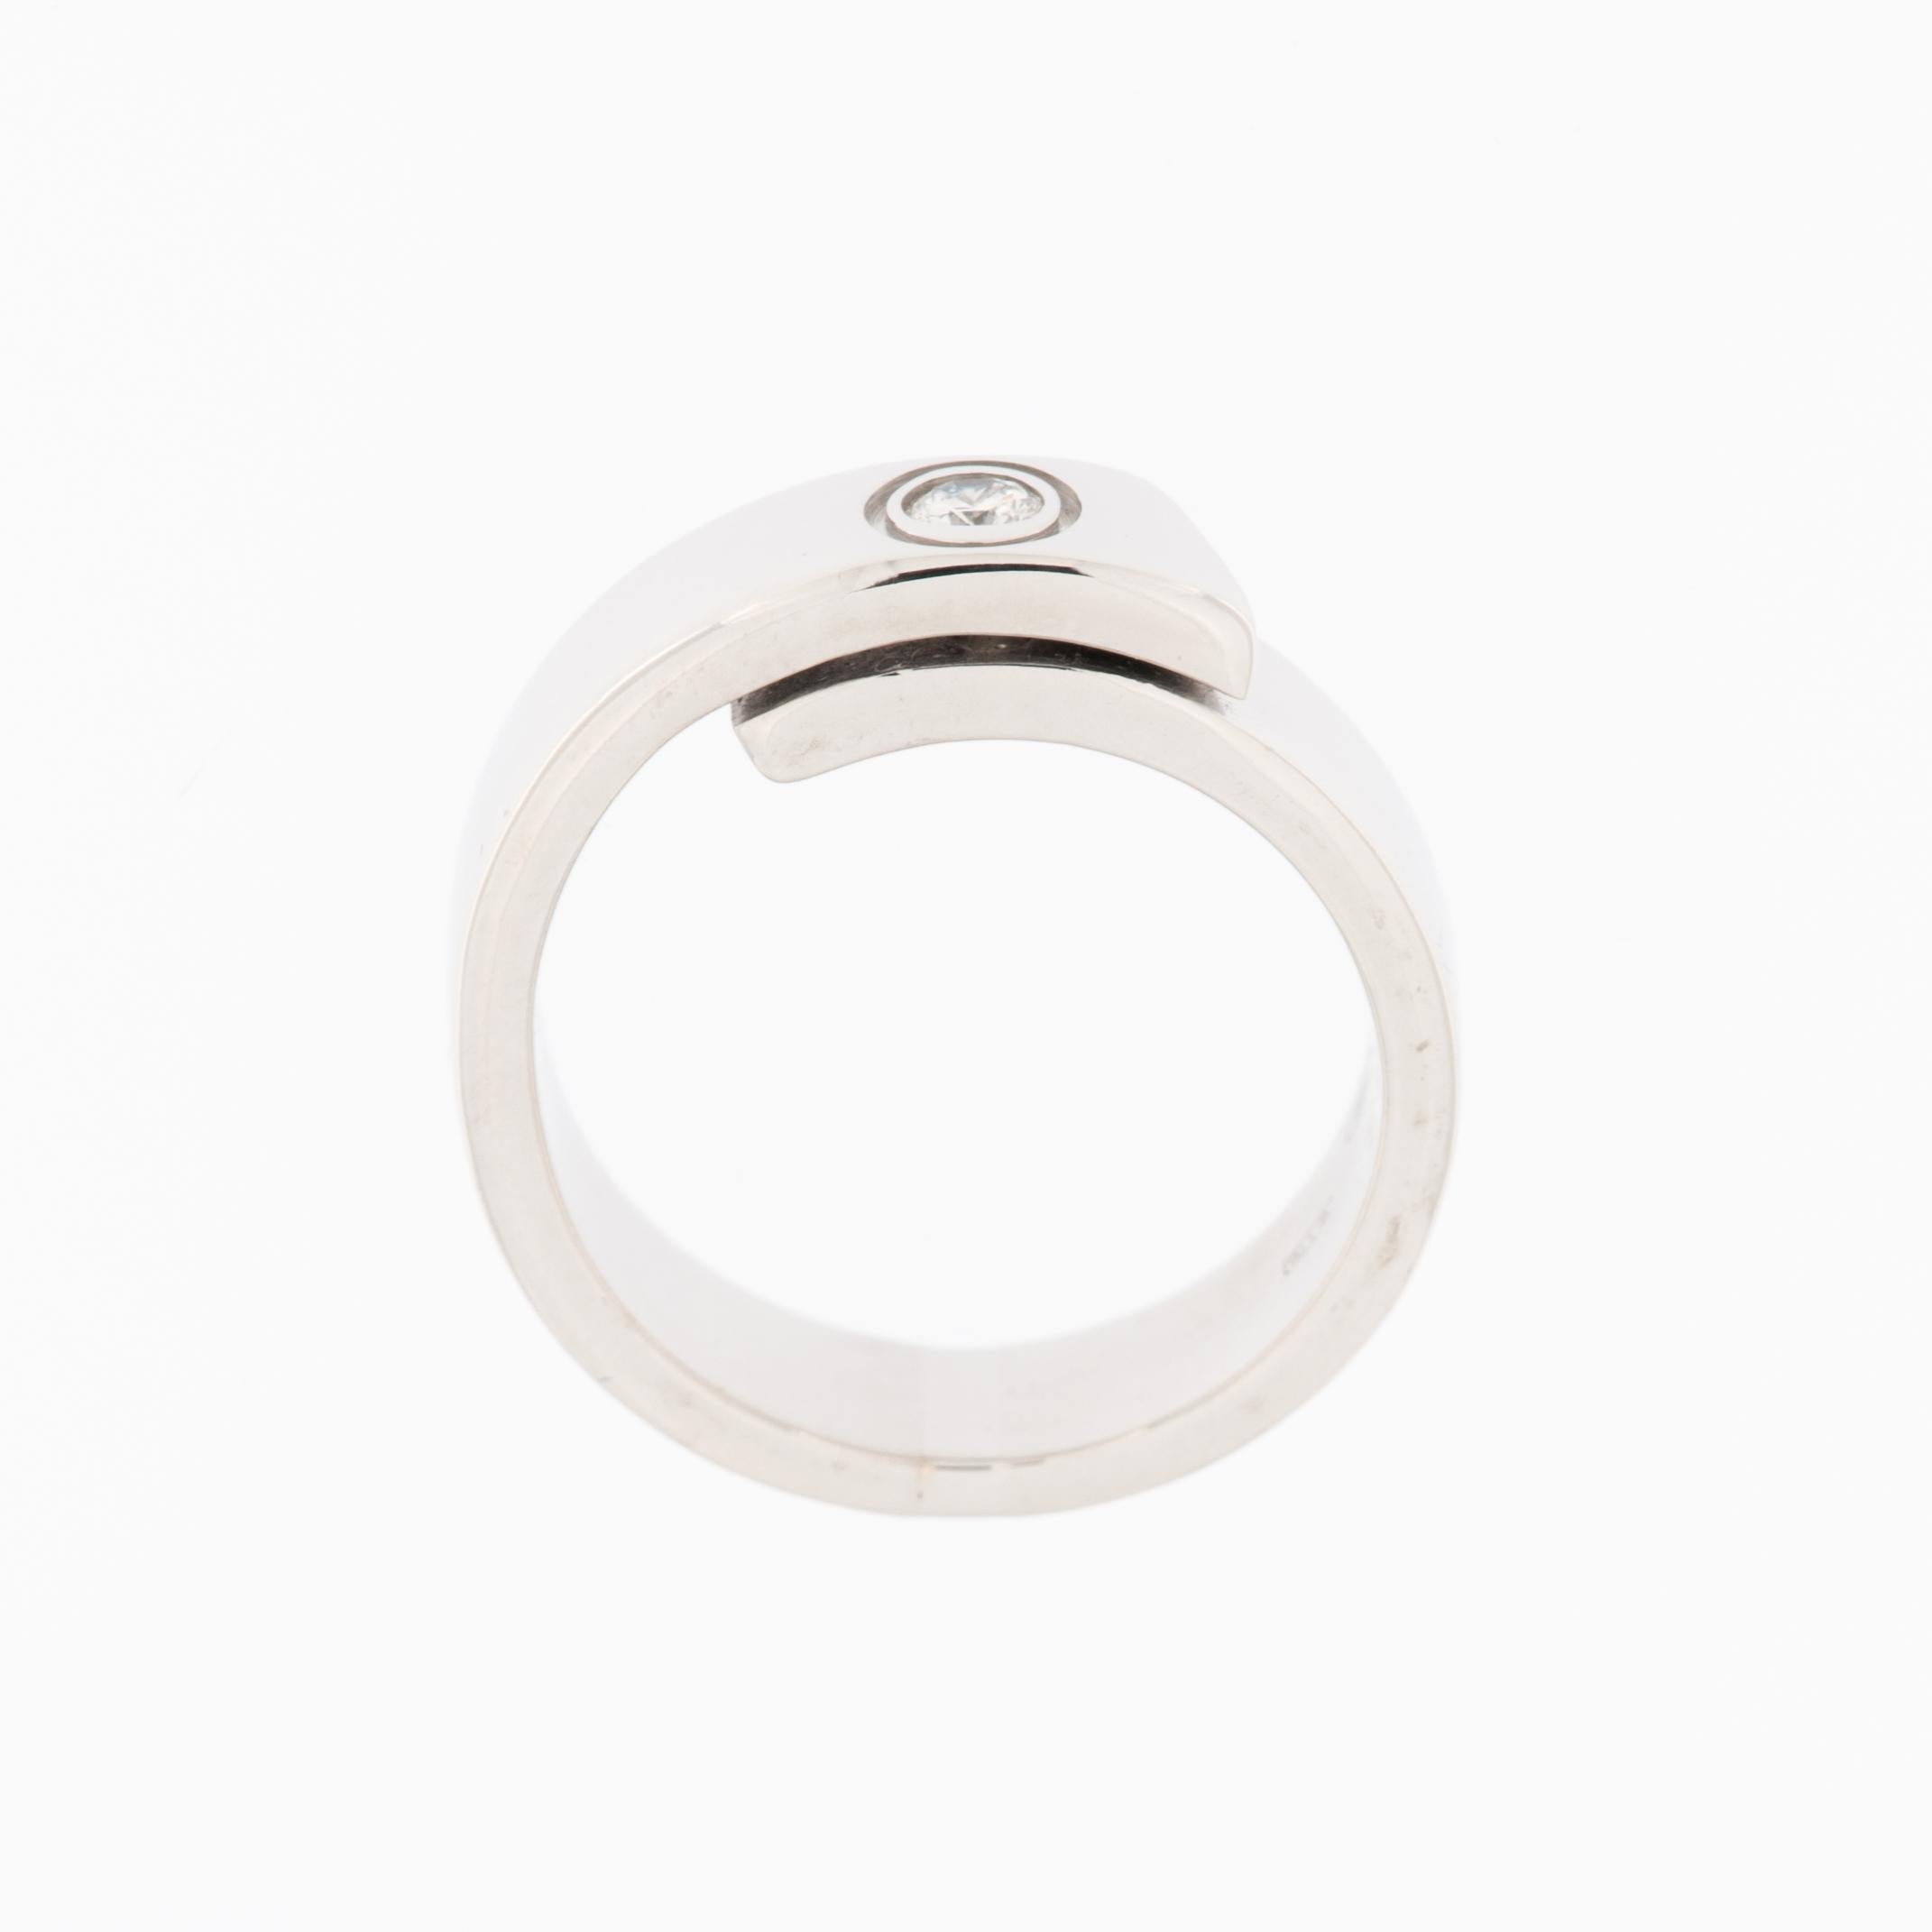 This Cartier Anniversary Band Ring is a true masterpiece, showcasing the renowned craftsmanship and timeless elegance synonymous with the Cartier brand. Meticulously crafted from lustrous 18 karat white gold, the ring embodies sophistication and